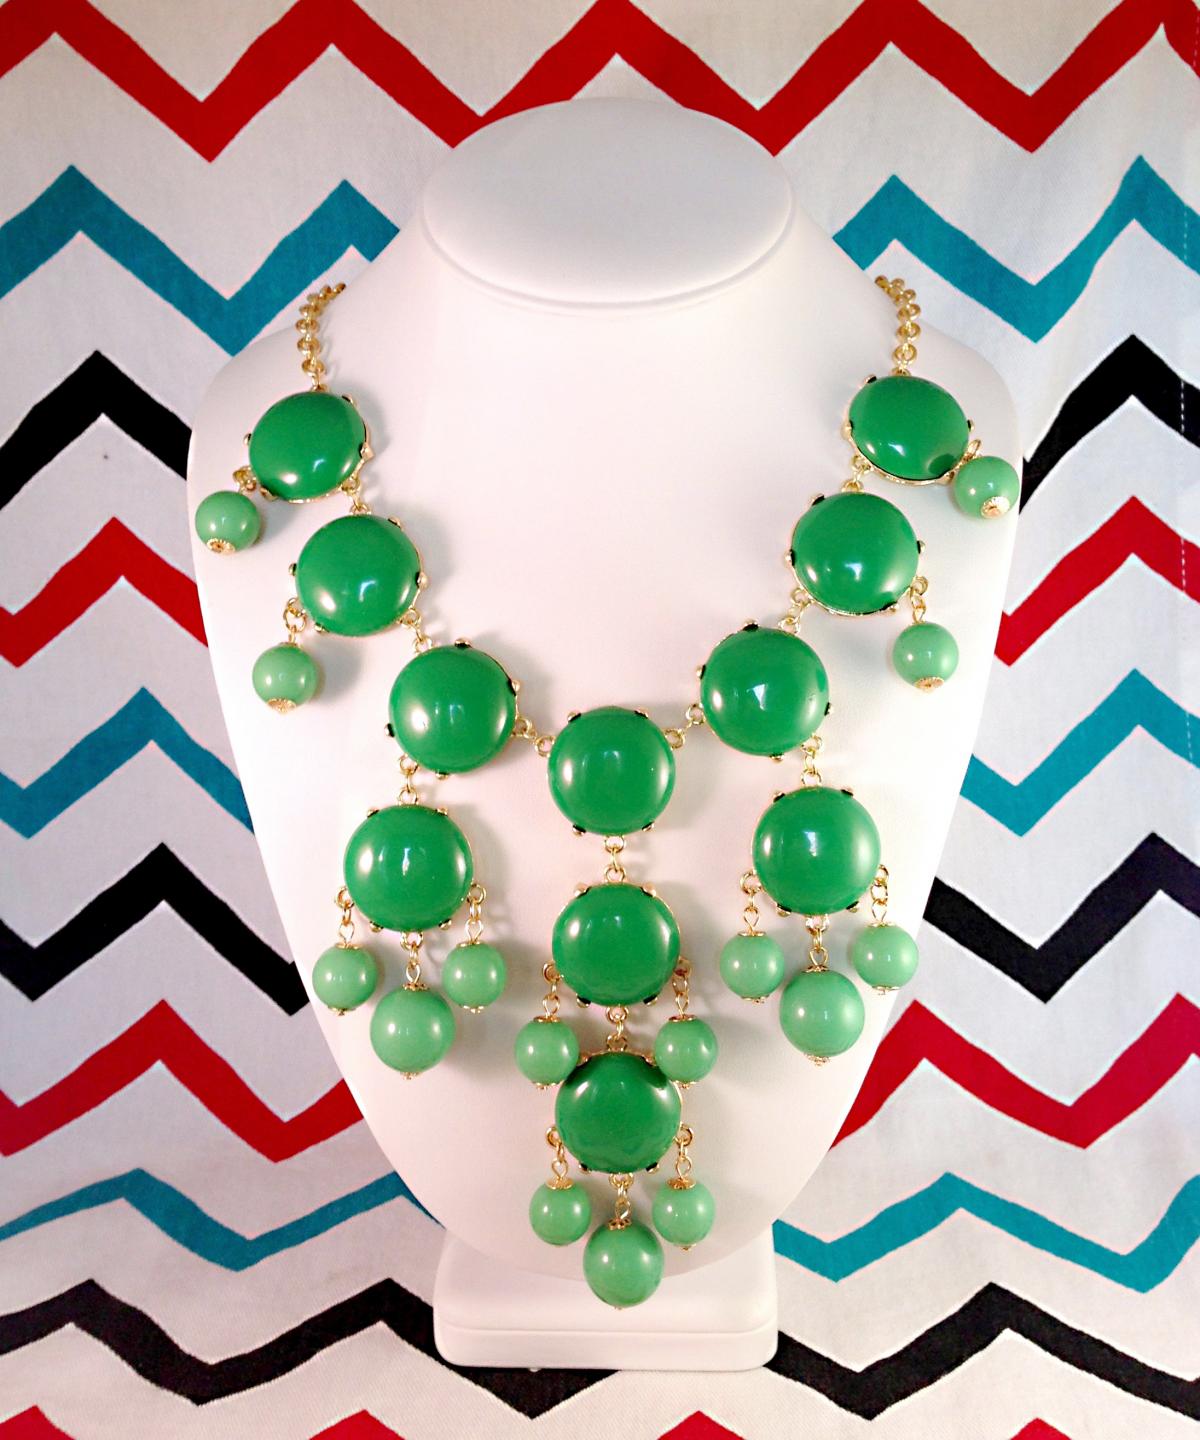 J-crew Inspired Bubble Bib Statement Necklace In Kelly Green- Ships From Usa!